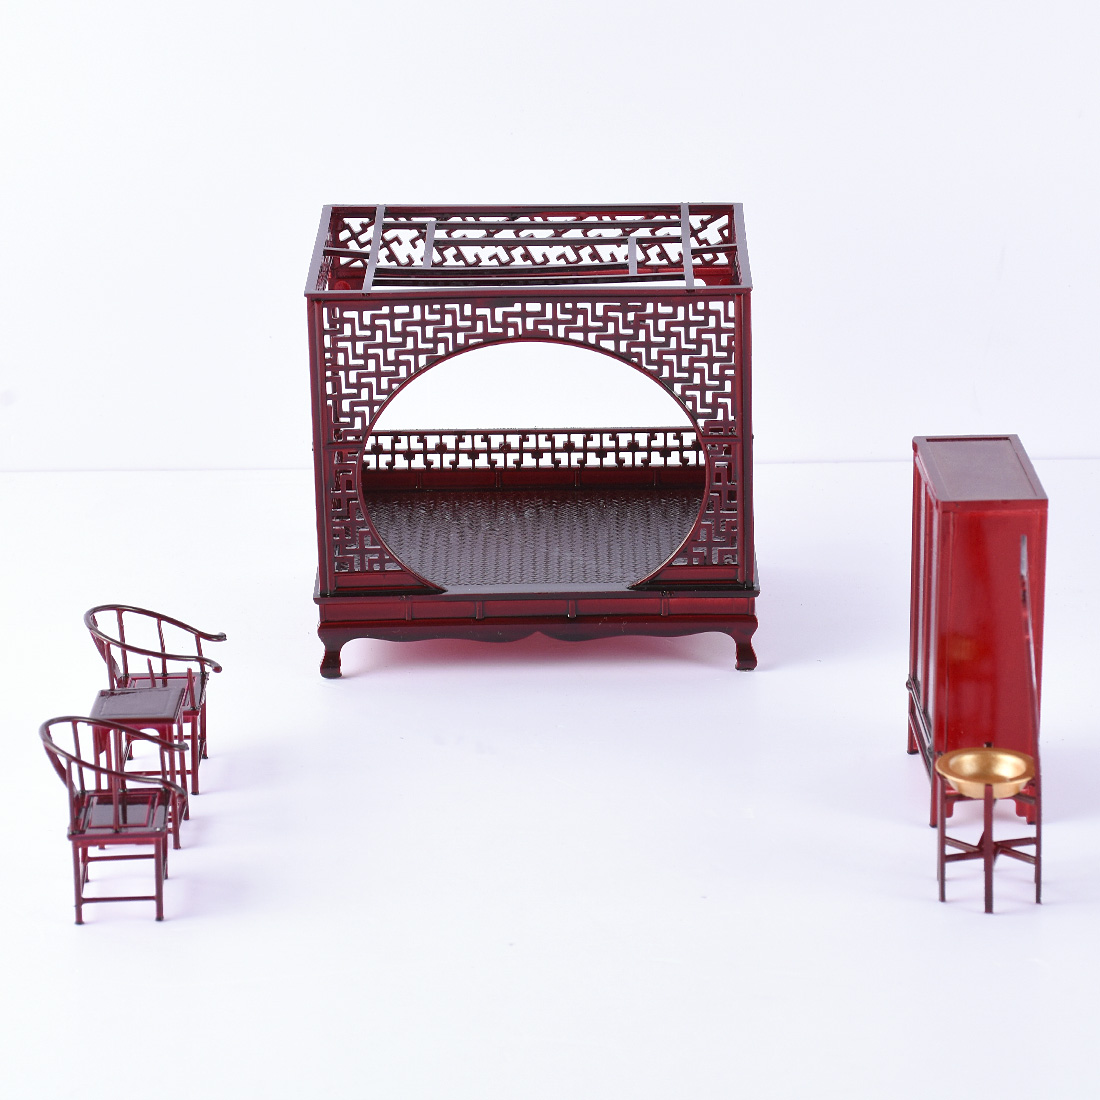 Crabkingdom-175165165mm-Chinese-Mahogany-Bedroom-Doll-House-DIY-Toy-Set-Collection-Gift-Display-Deco-1485796